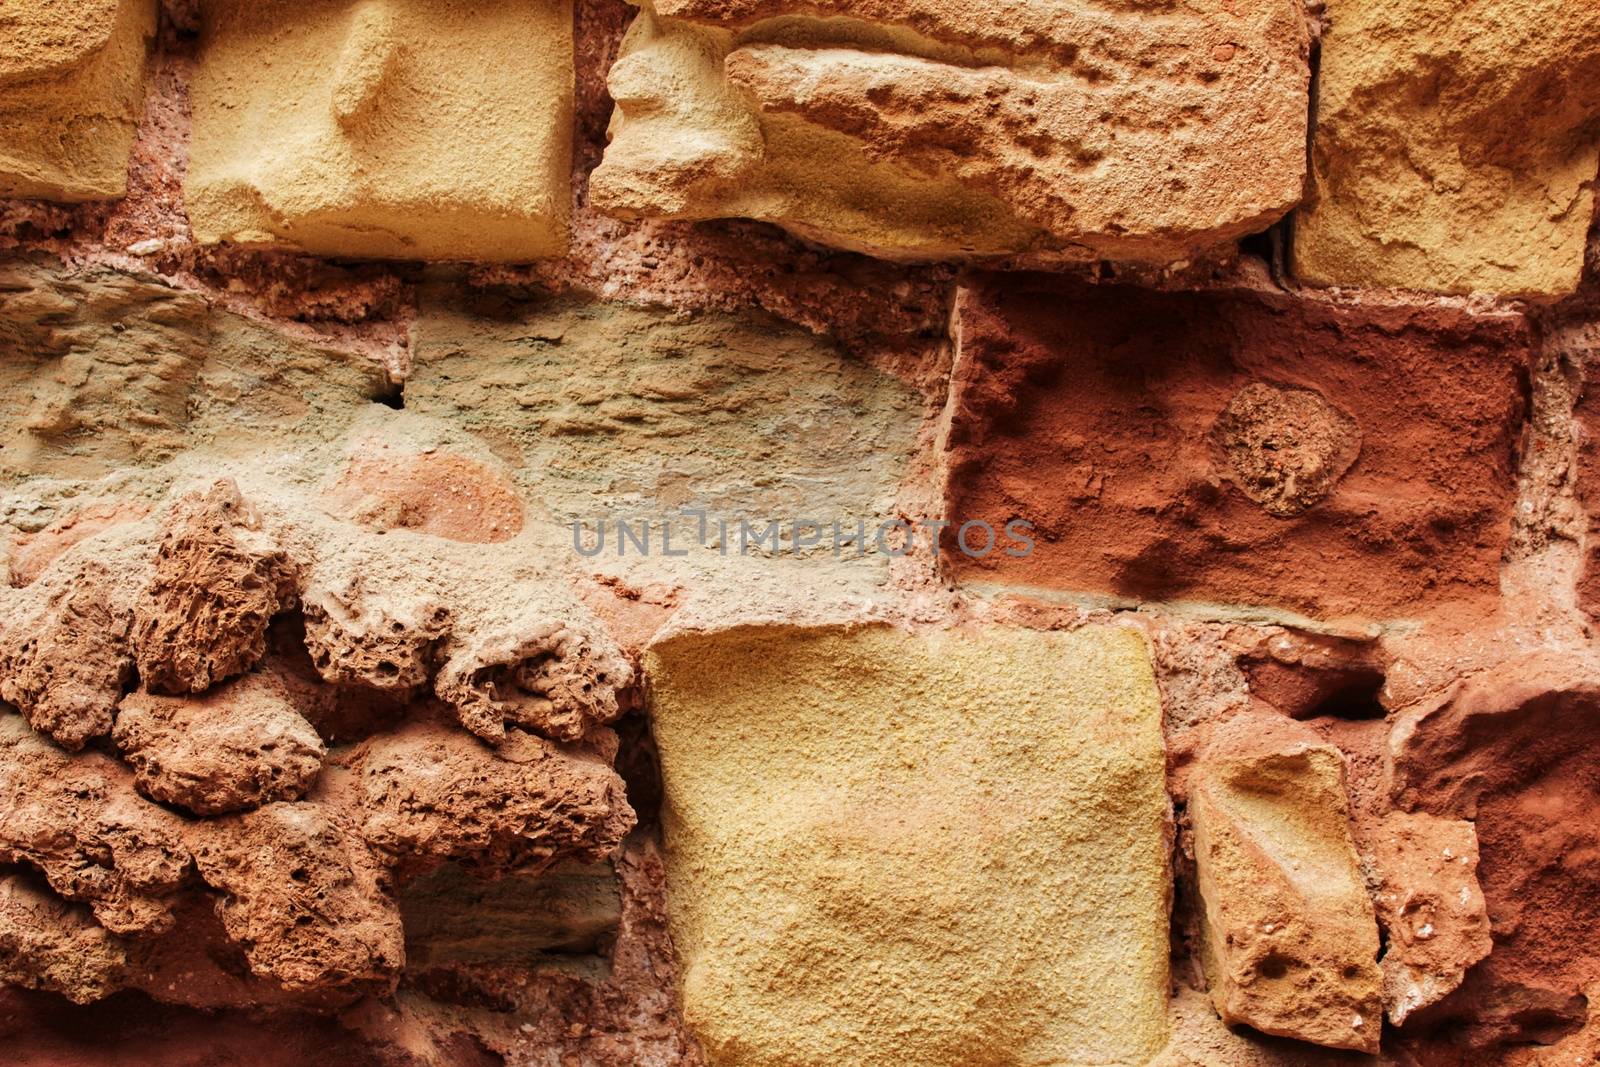 Colorful stone textures by soniabonet